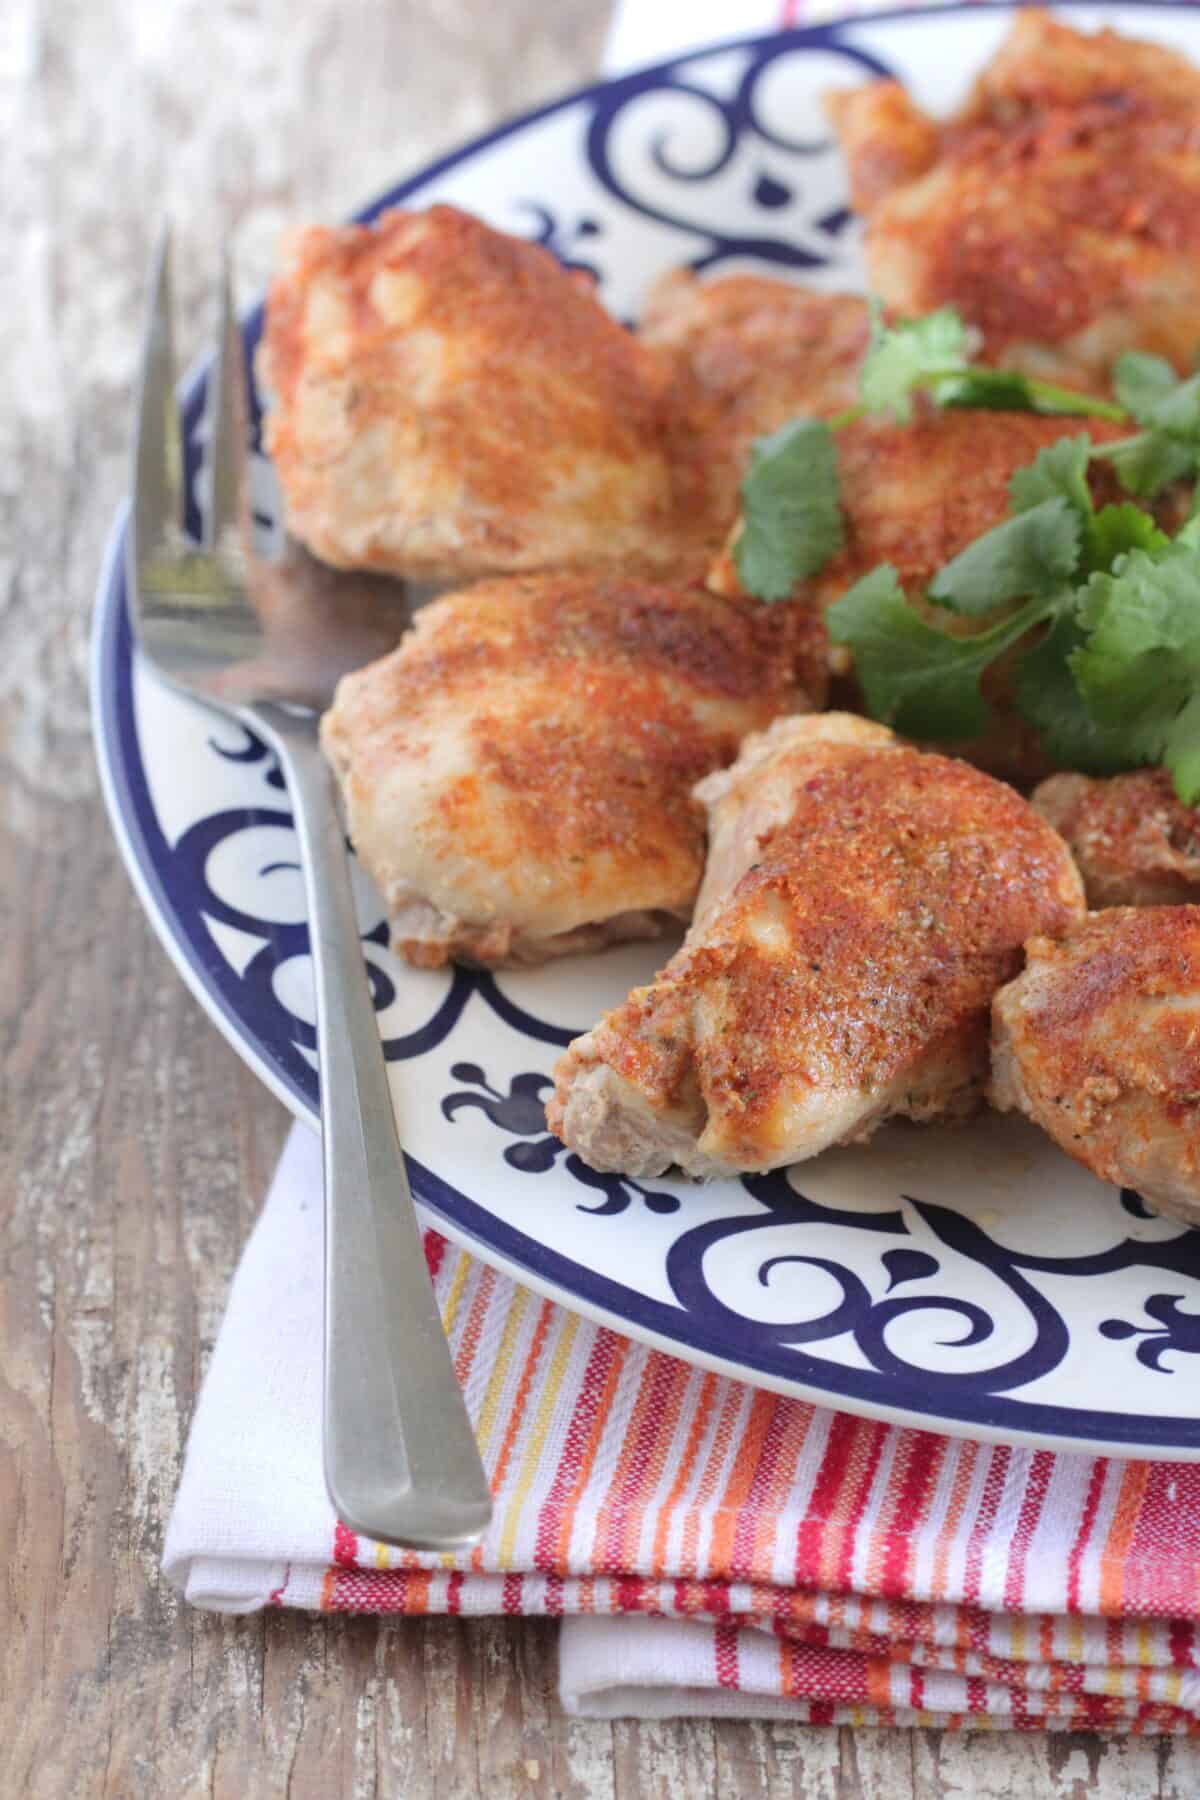 baked chicken thighs on serving plate